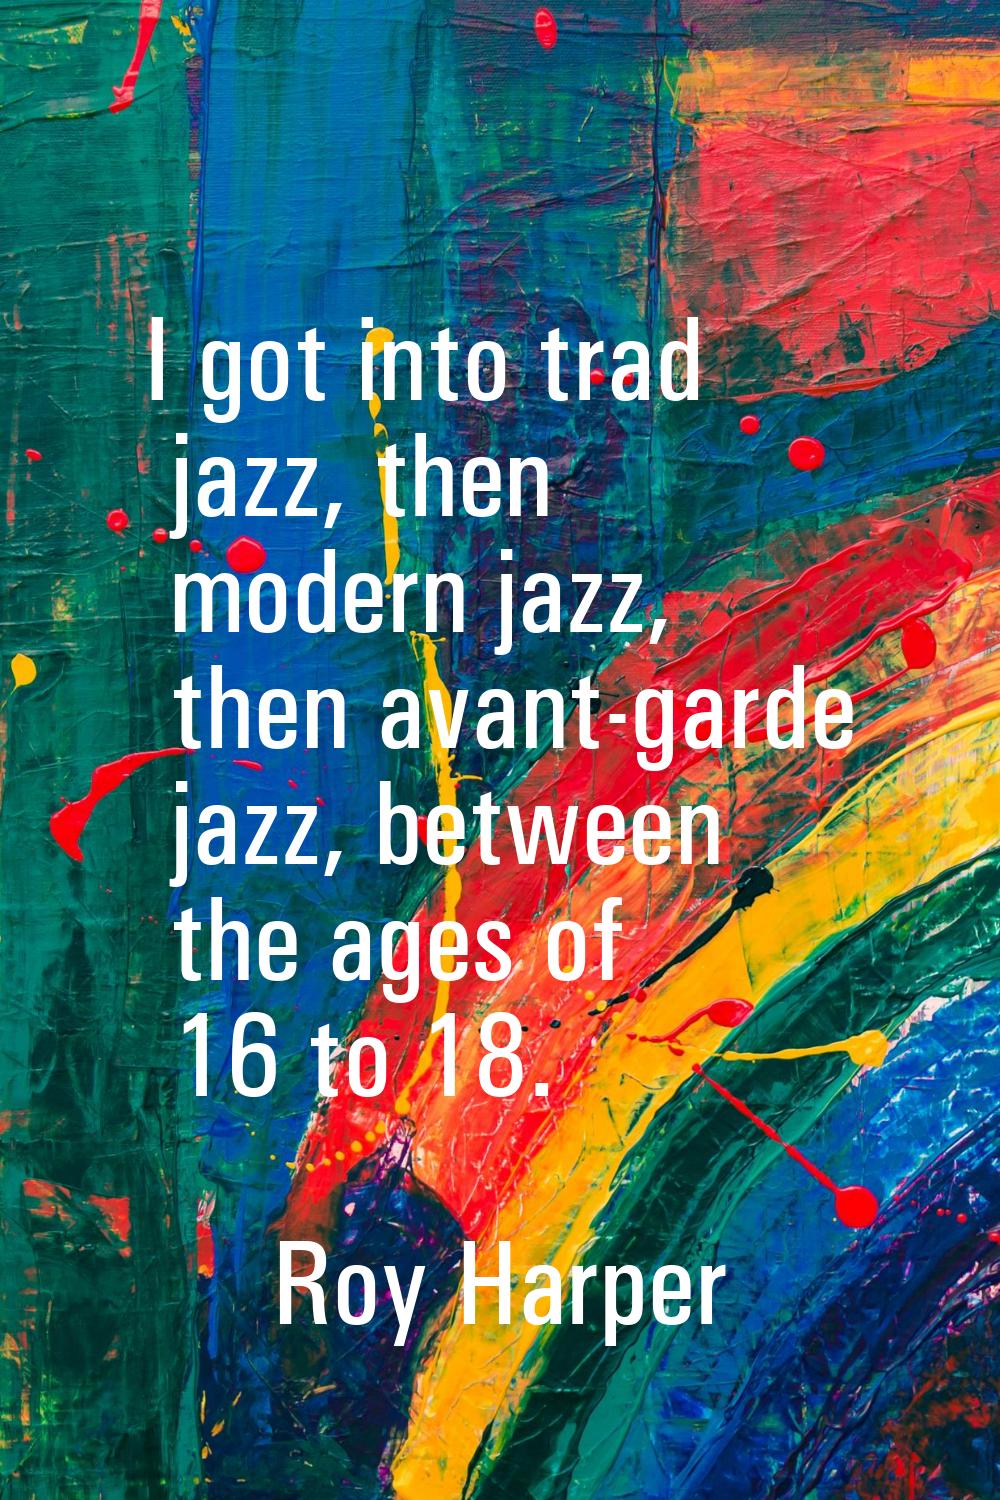 I got into trad jazz, then modern jazz, then avant-garde jazz, between the ages of 16 to 18.